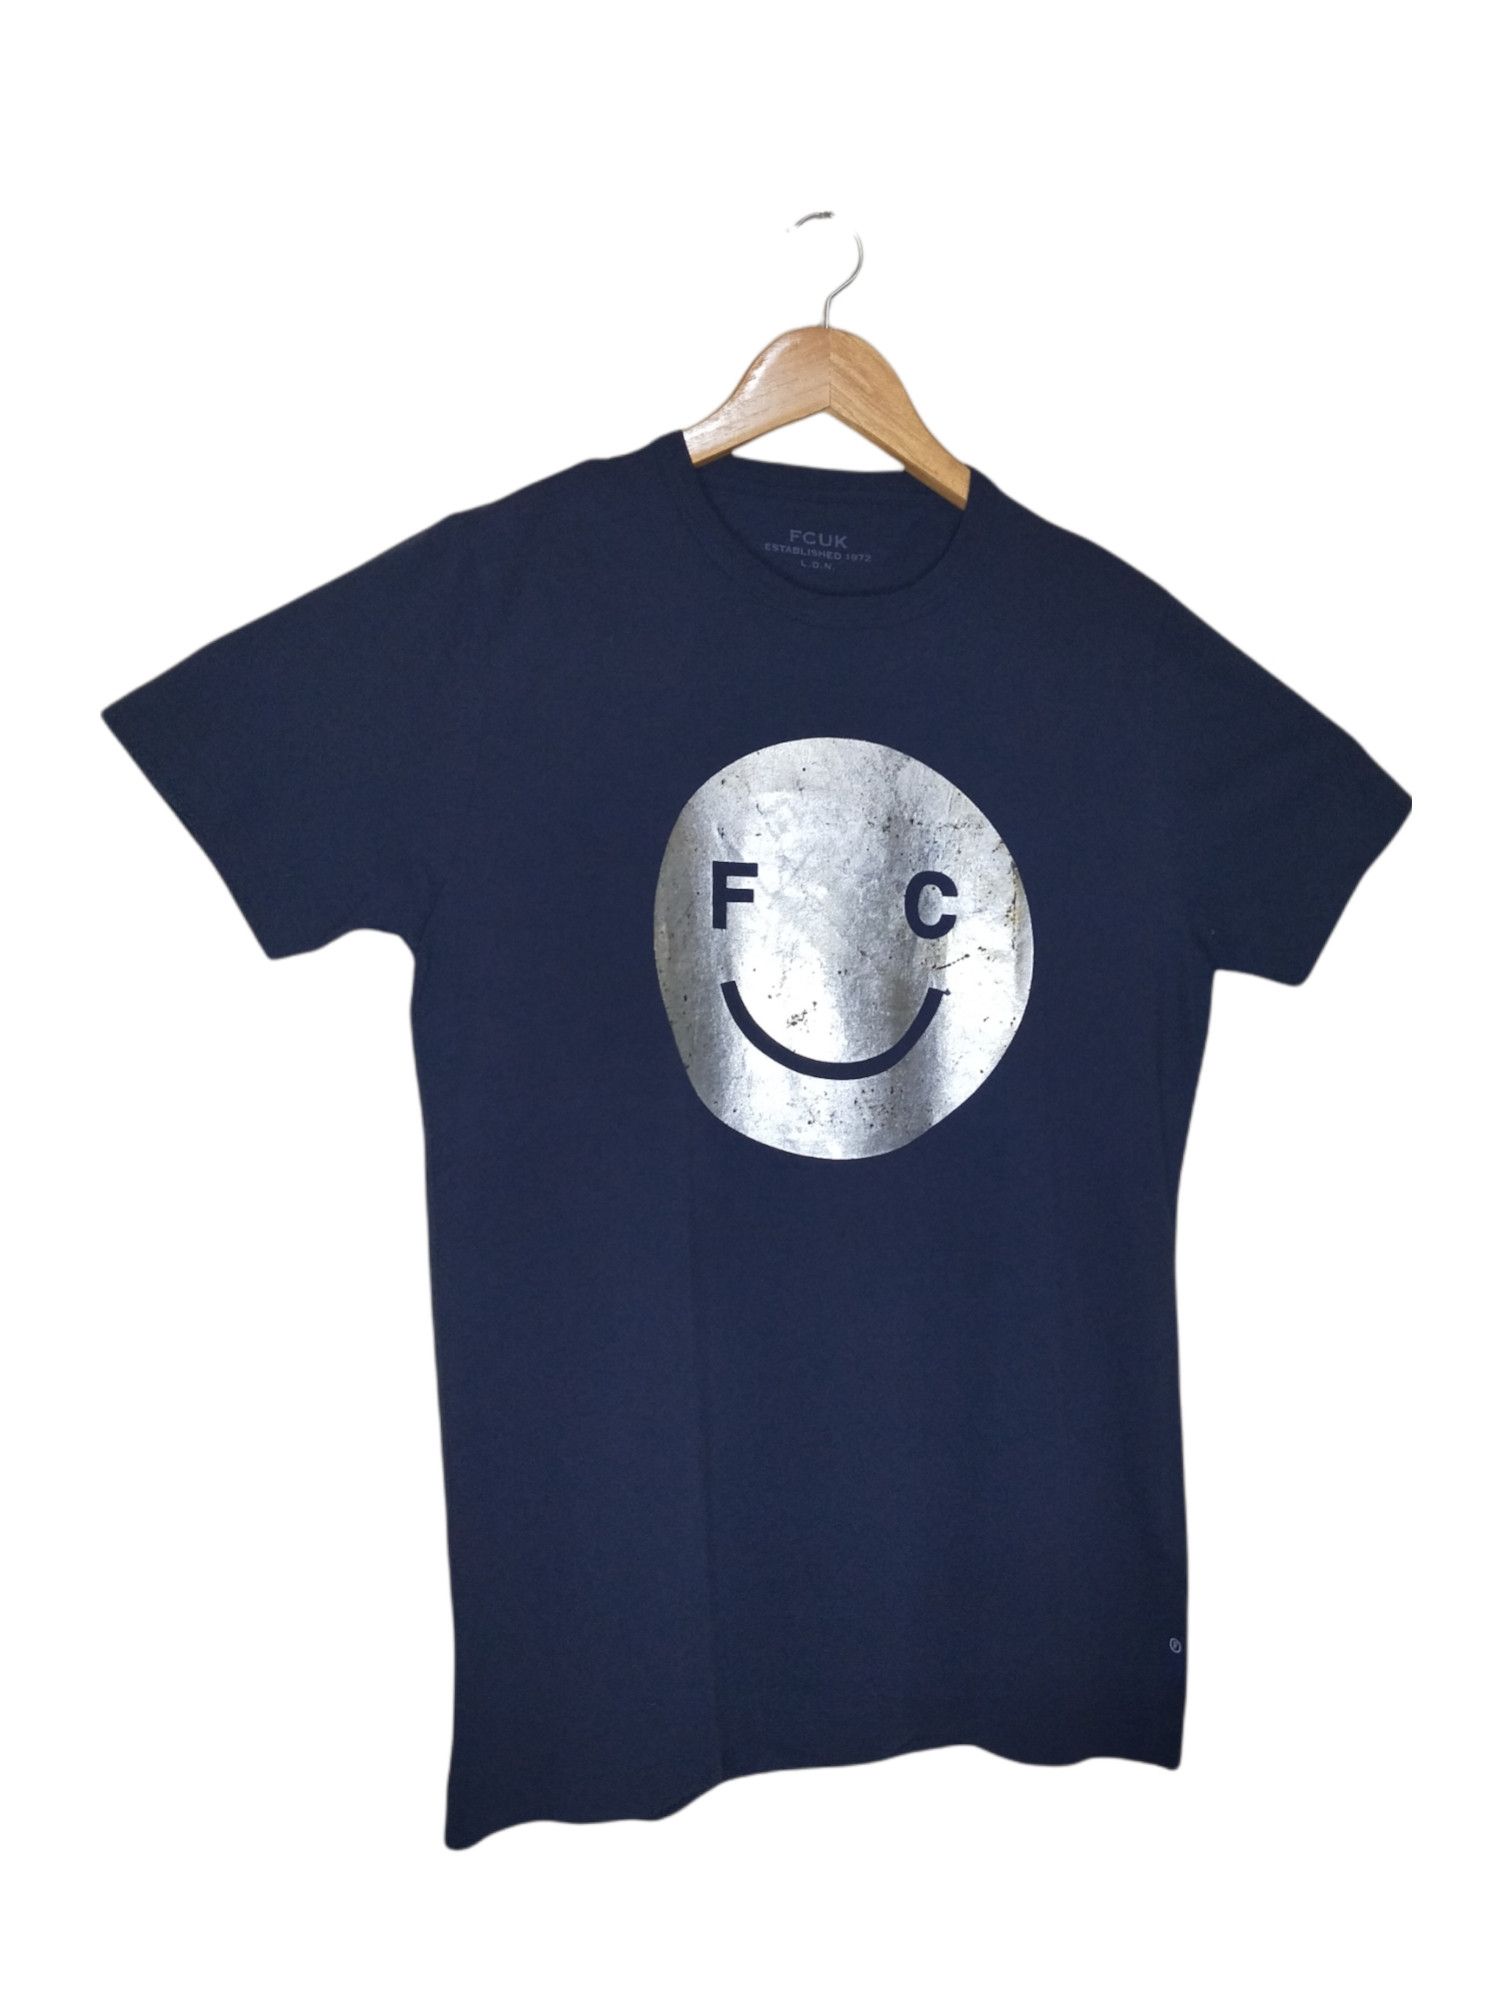 French Connection Authentic French Connection X FCUK Big Smile Logo Tee Size US M / EU 48-50 / 2 - 2 Preview